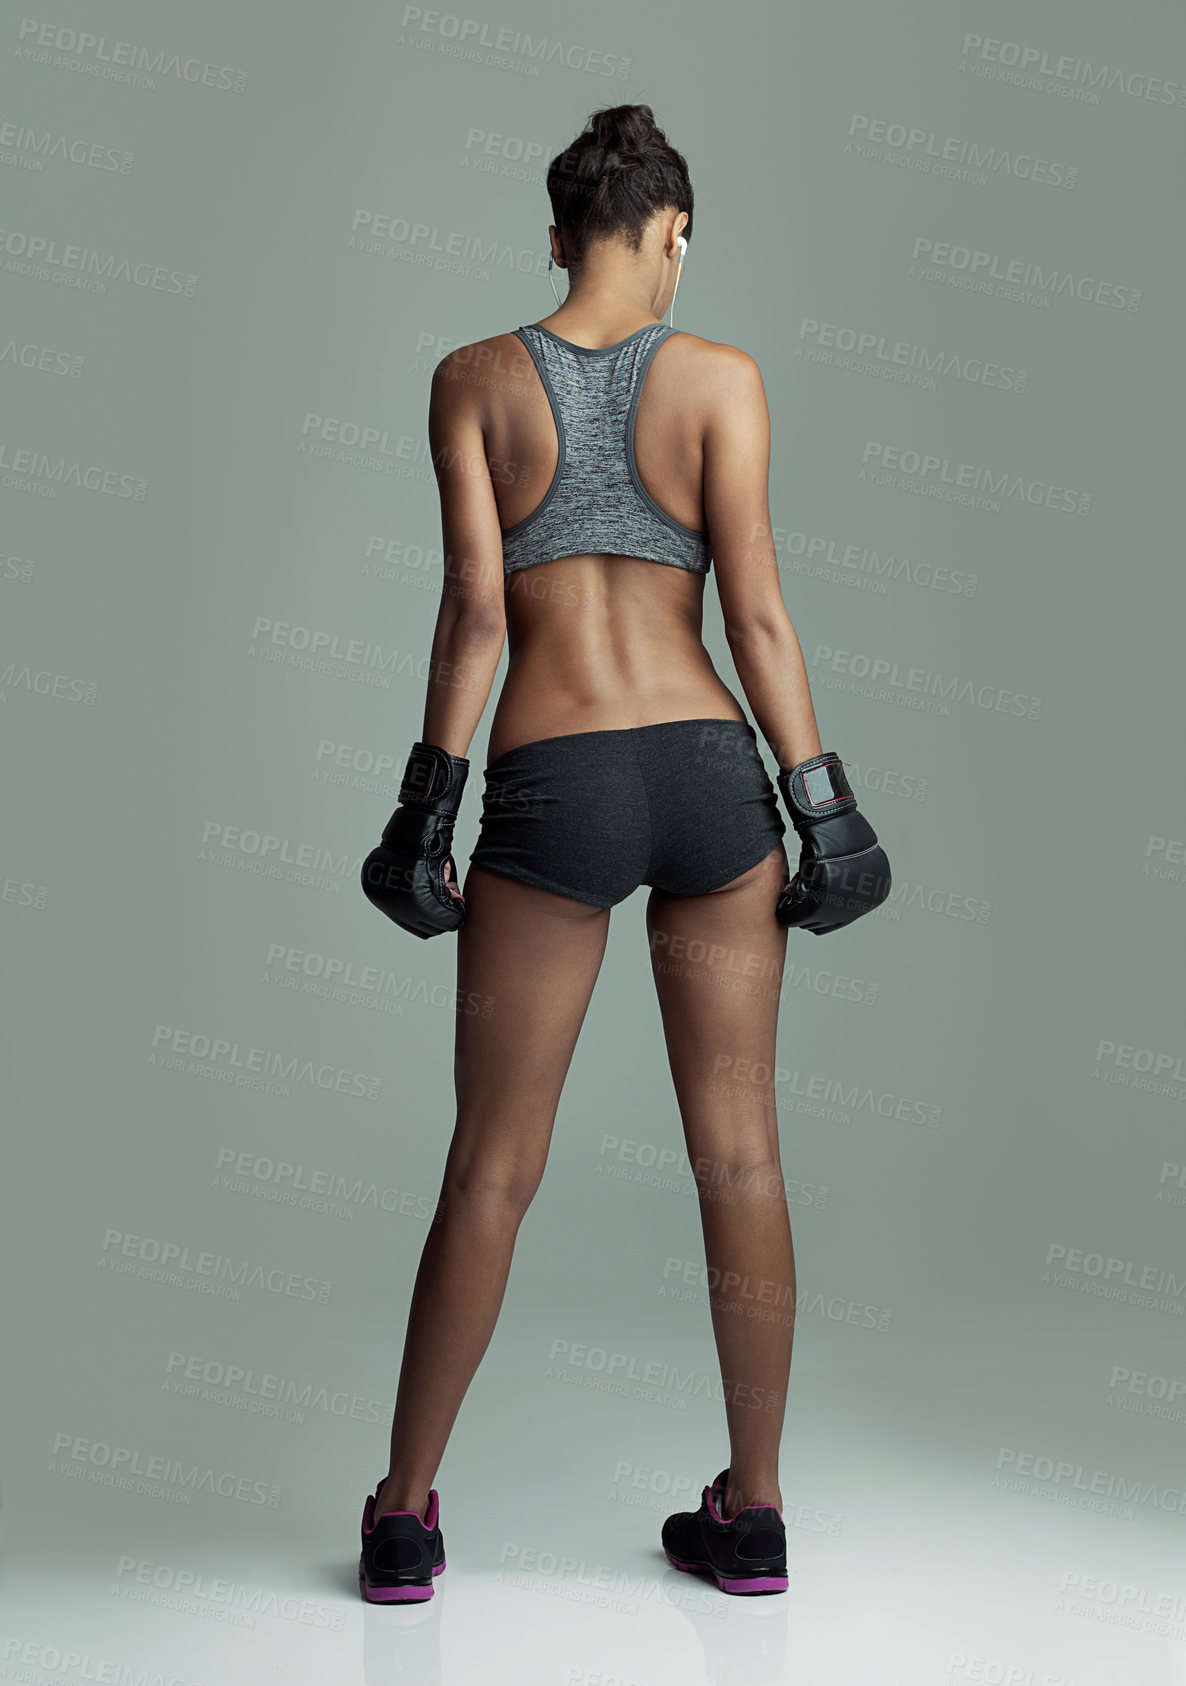 Buy stock photo Rearview studio shot of a fit young boxer against a gray background